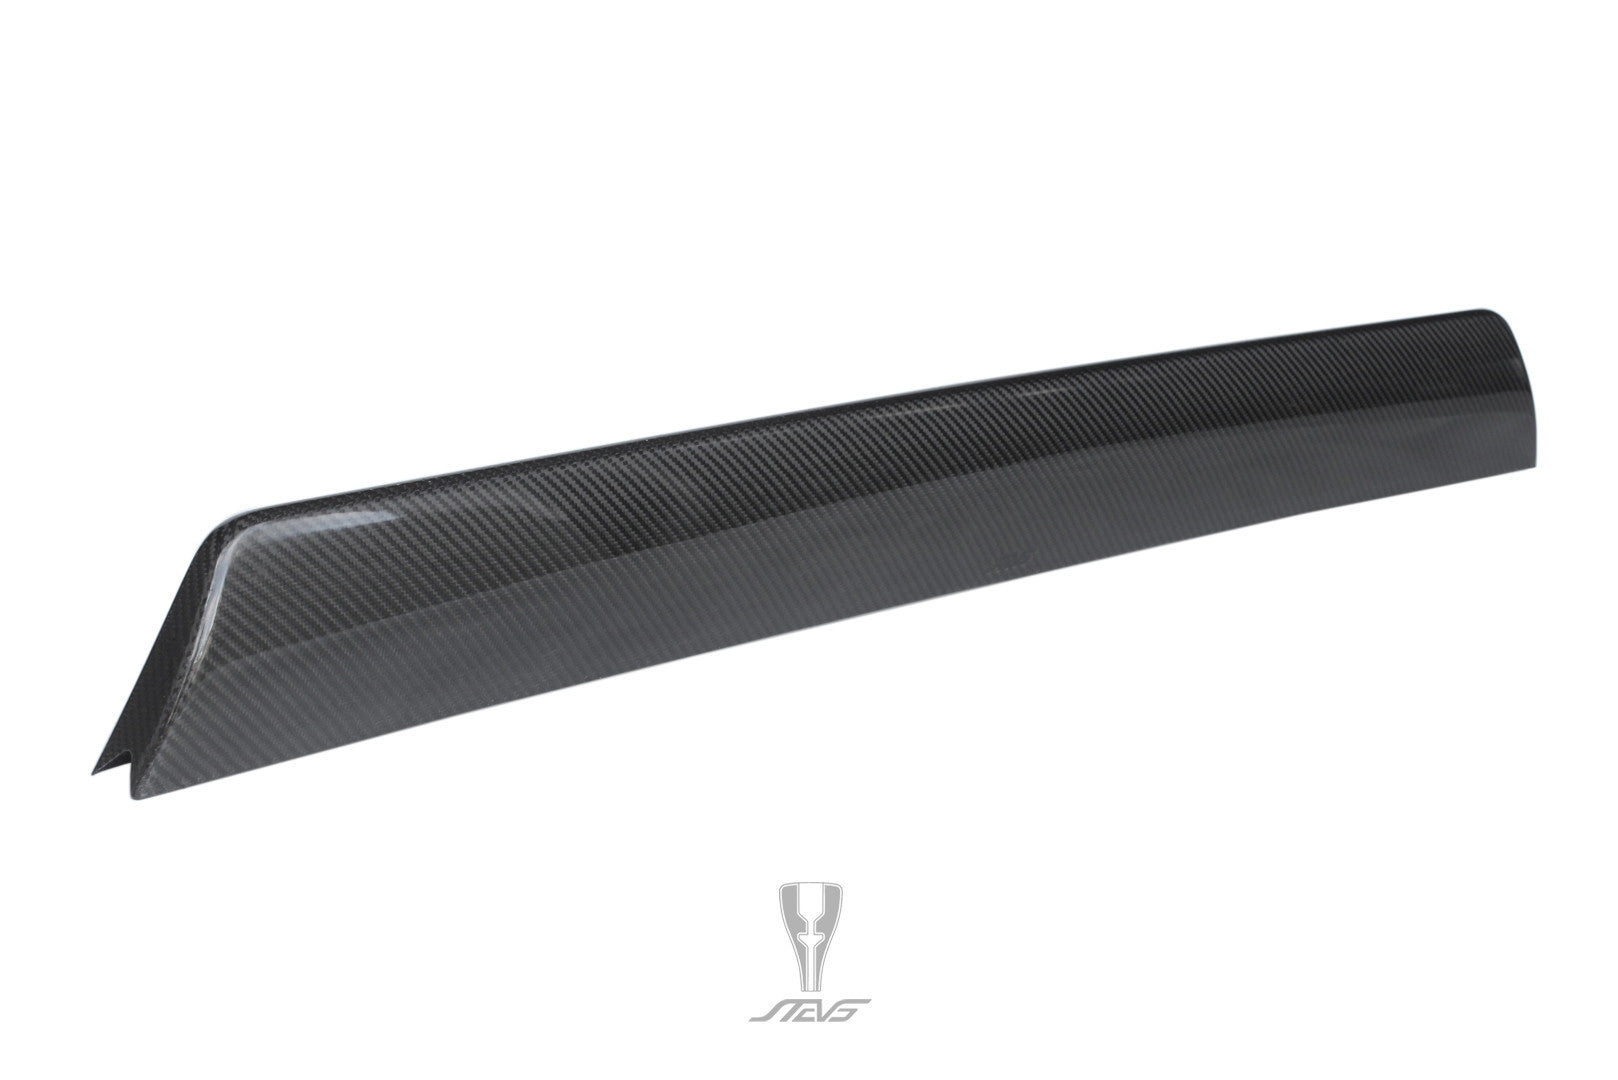 STEVS Crown carbon fiber wing extension, rear angle view